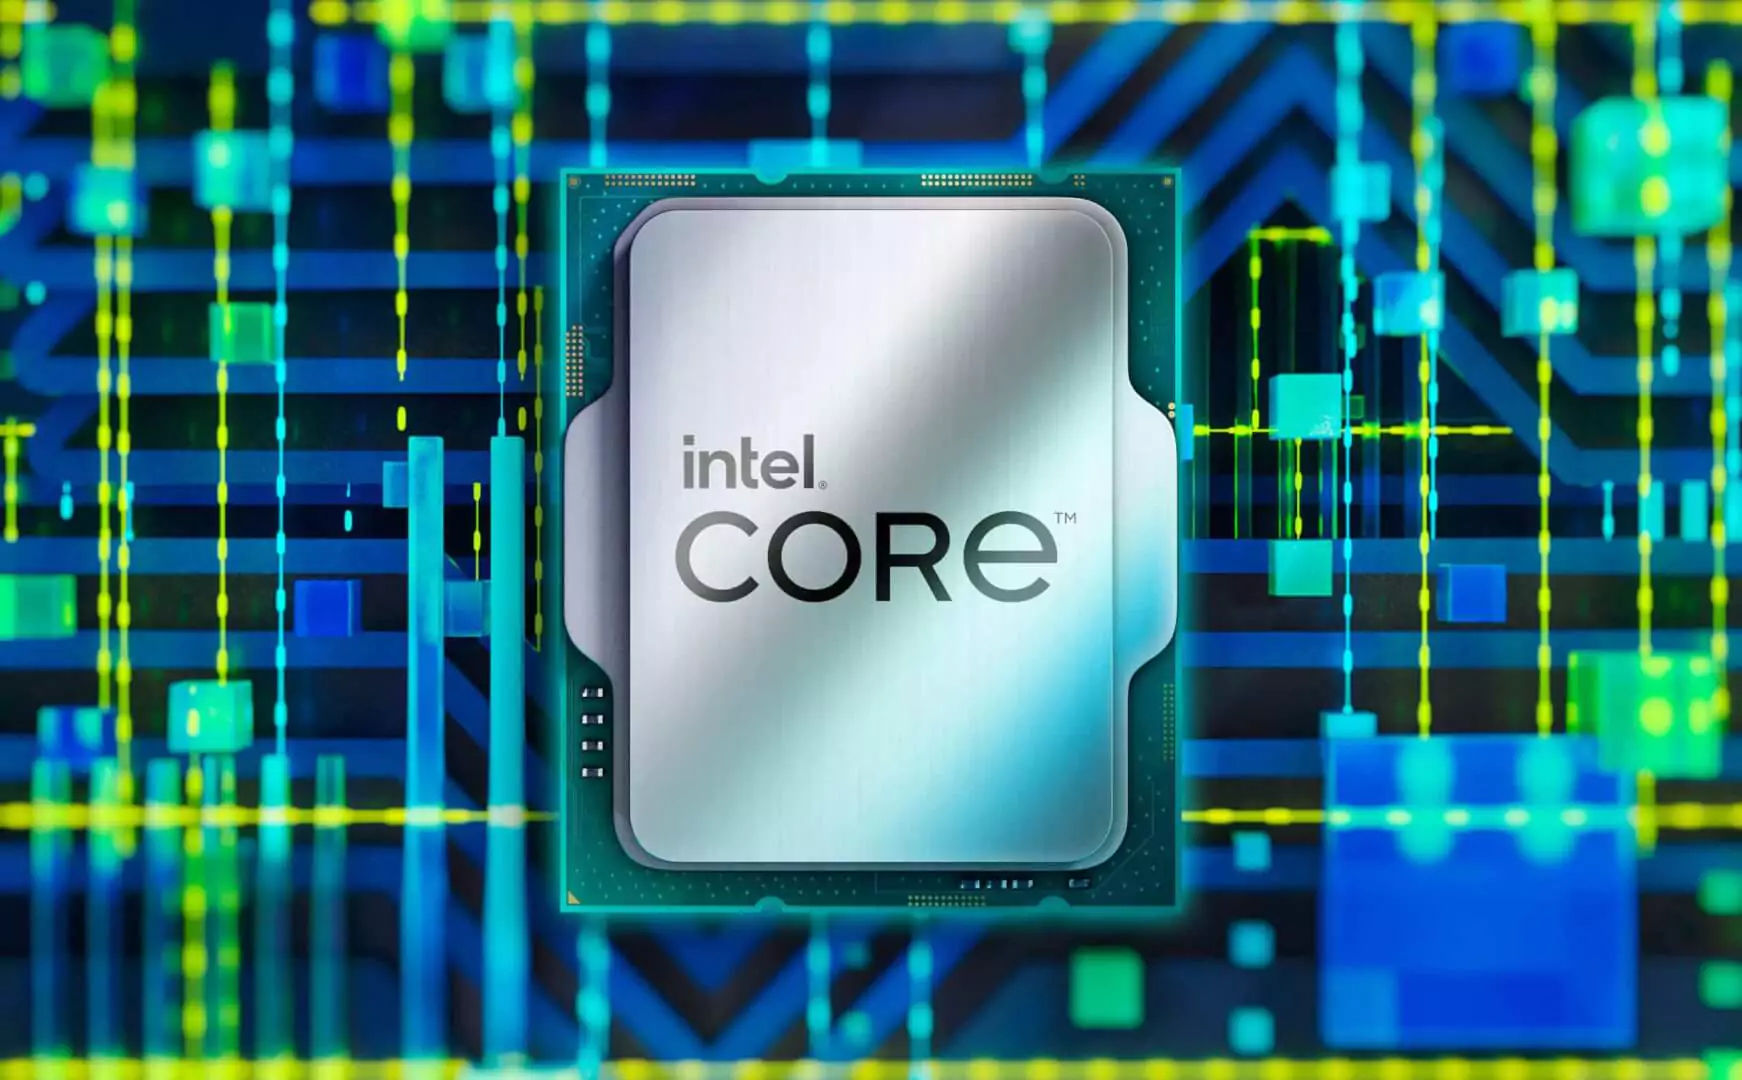 Intel's 15th Gen Arrow Lake Processors: Upgrades, Architecture, and Release Date